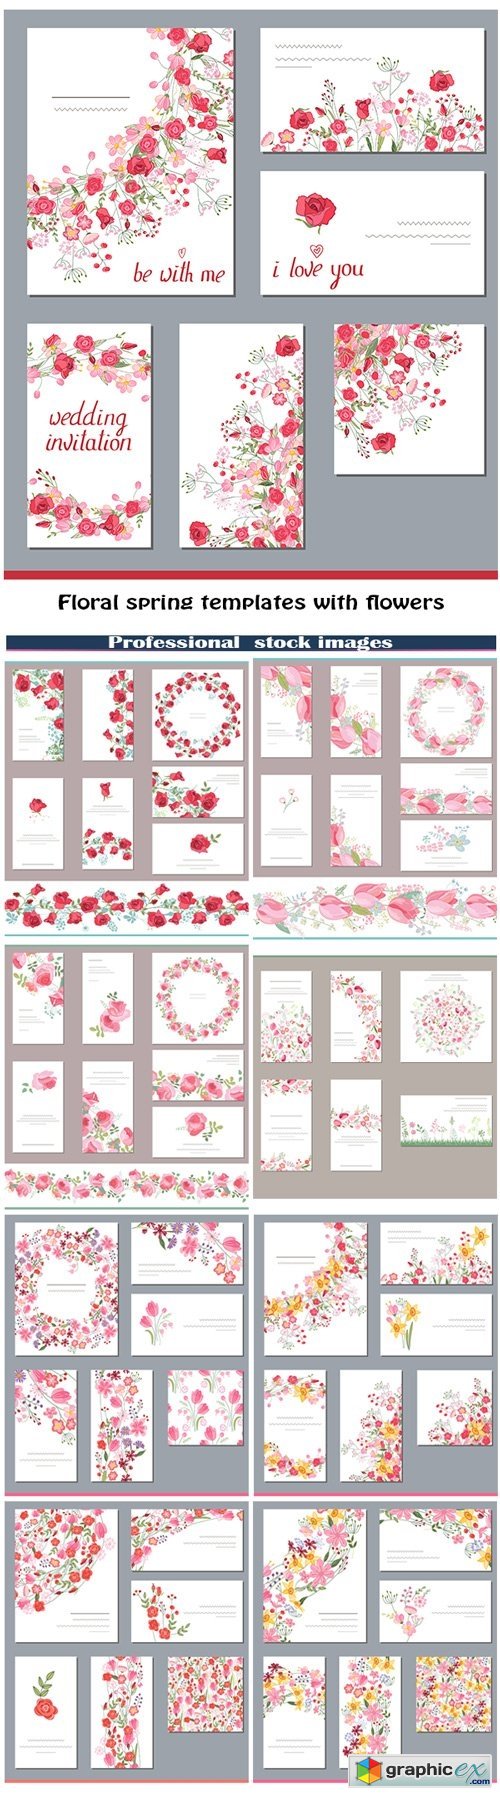 Floral spring templates with flowers